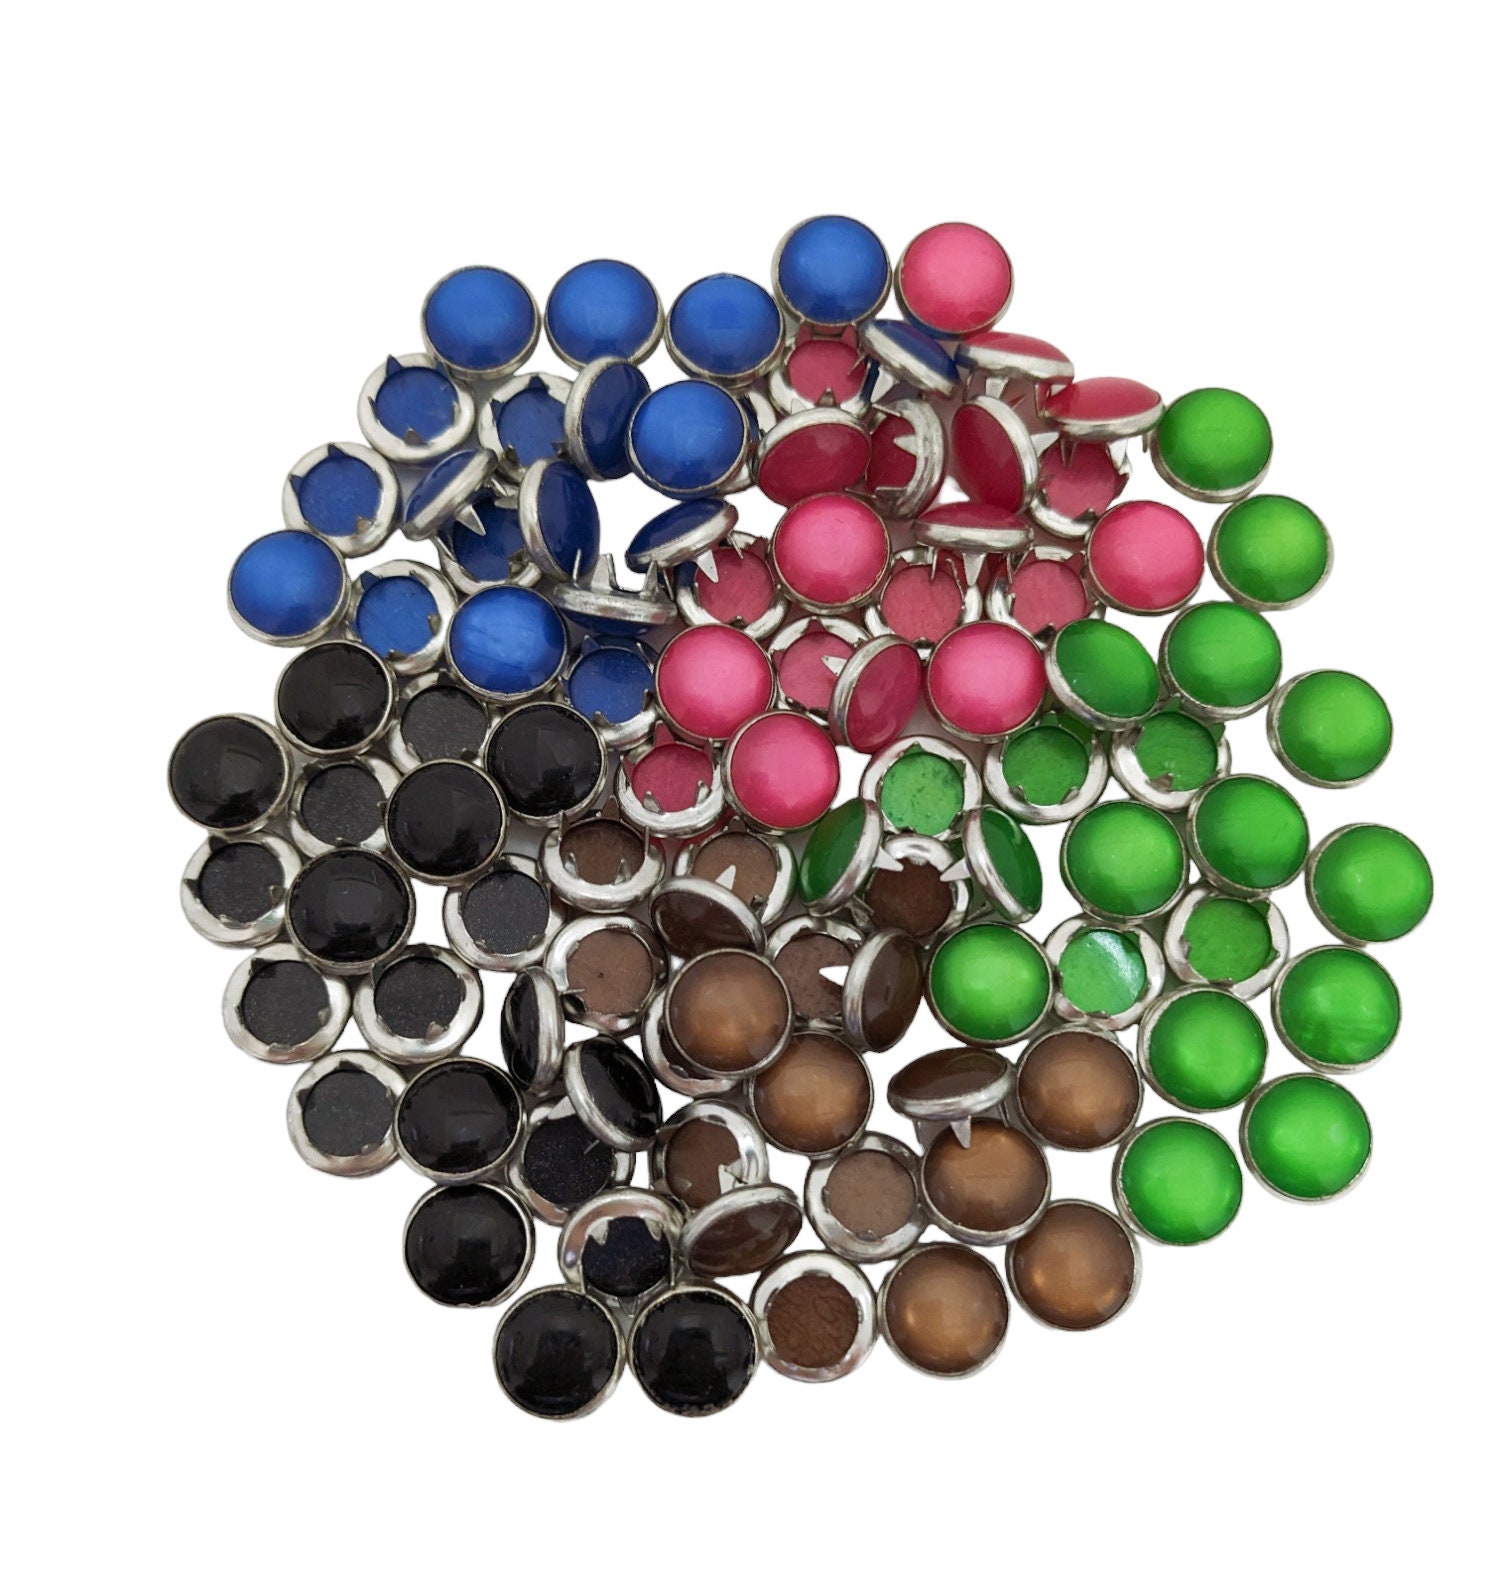 Arokimi Pearl Snaps Fasteners Kit 10M Prong Ring Snaps for Western Shirt Clothes Popper Studs(5 Color x 10 Sets)